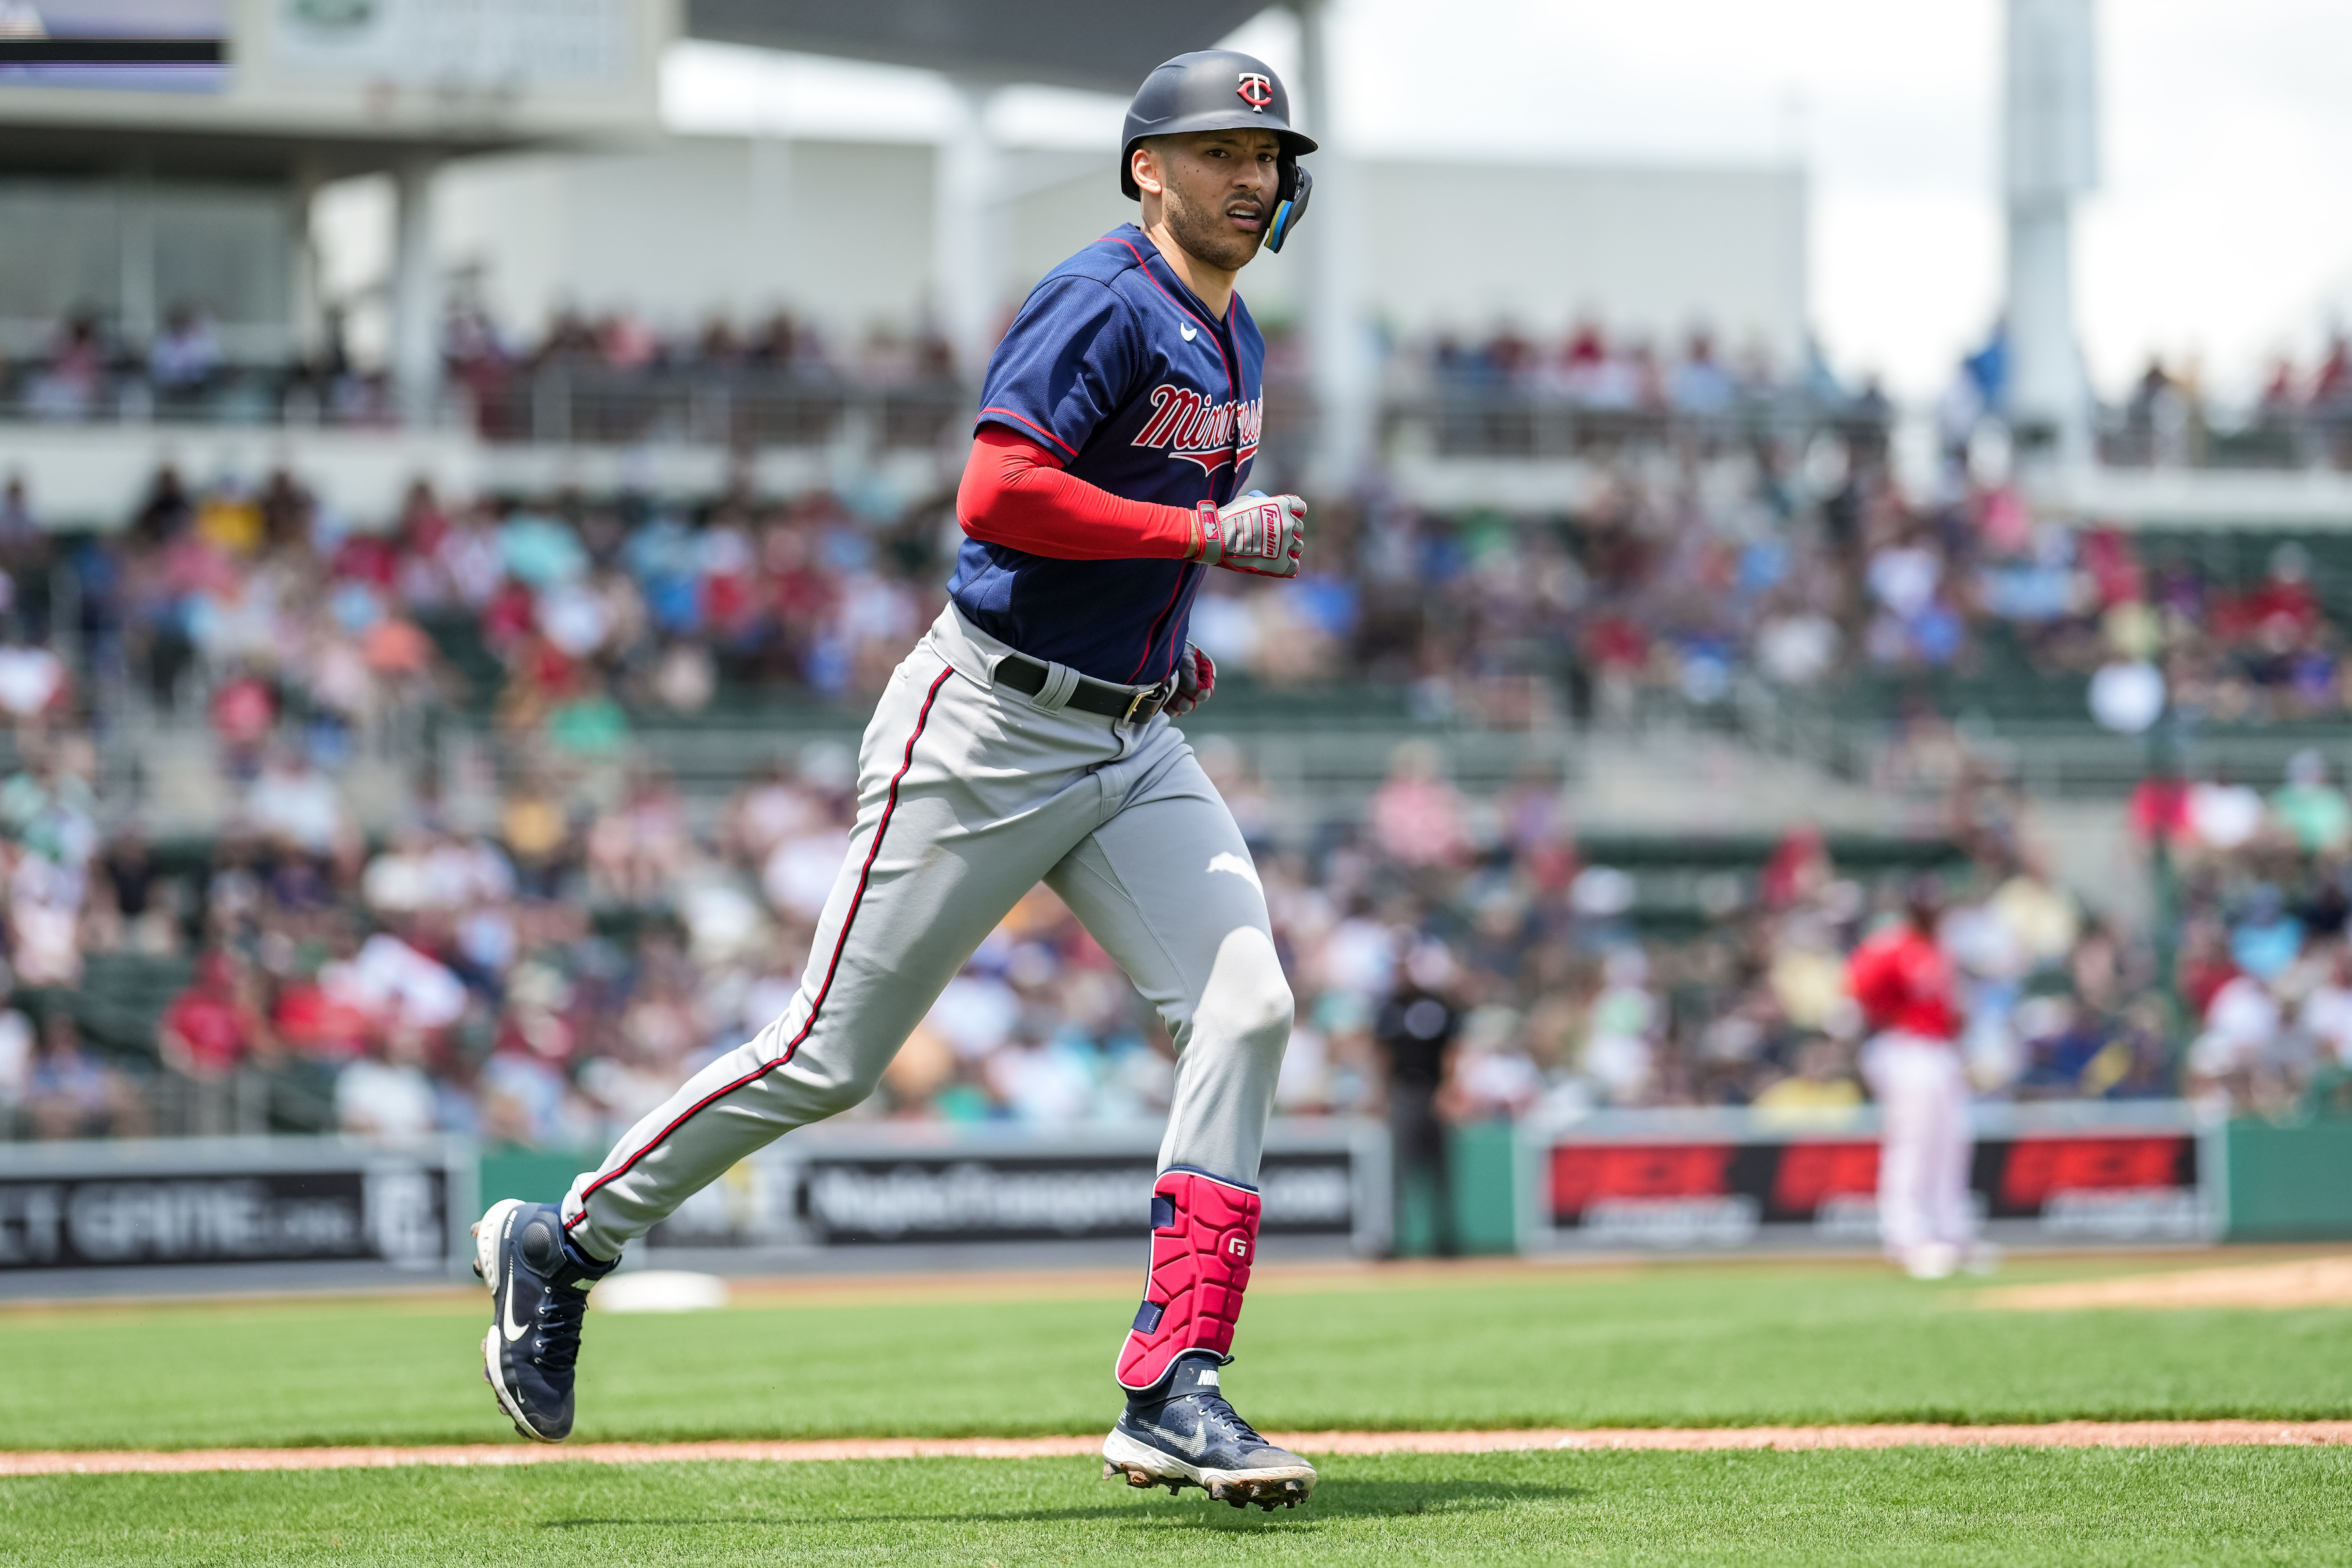 Minnesota Twins shortstop and Chicago Cubs free-agent target Carlos Correa runs the bases after hitting a home run during MLB Spring Training in April 2022